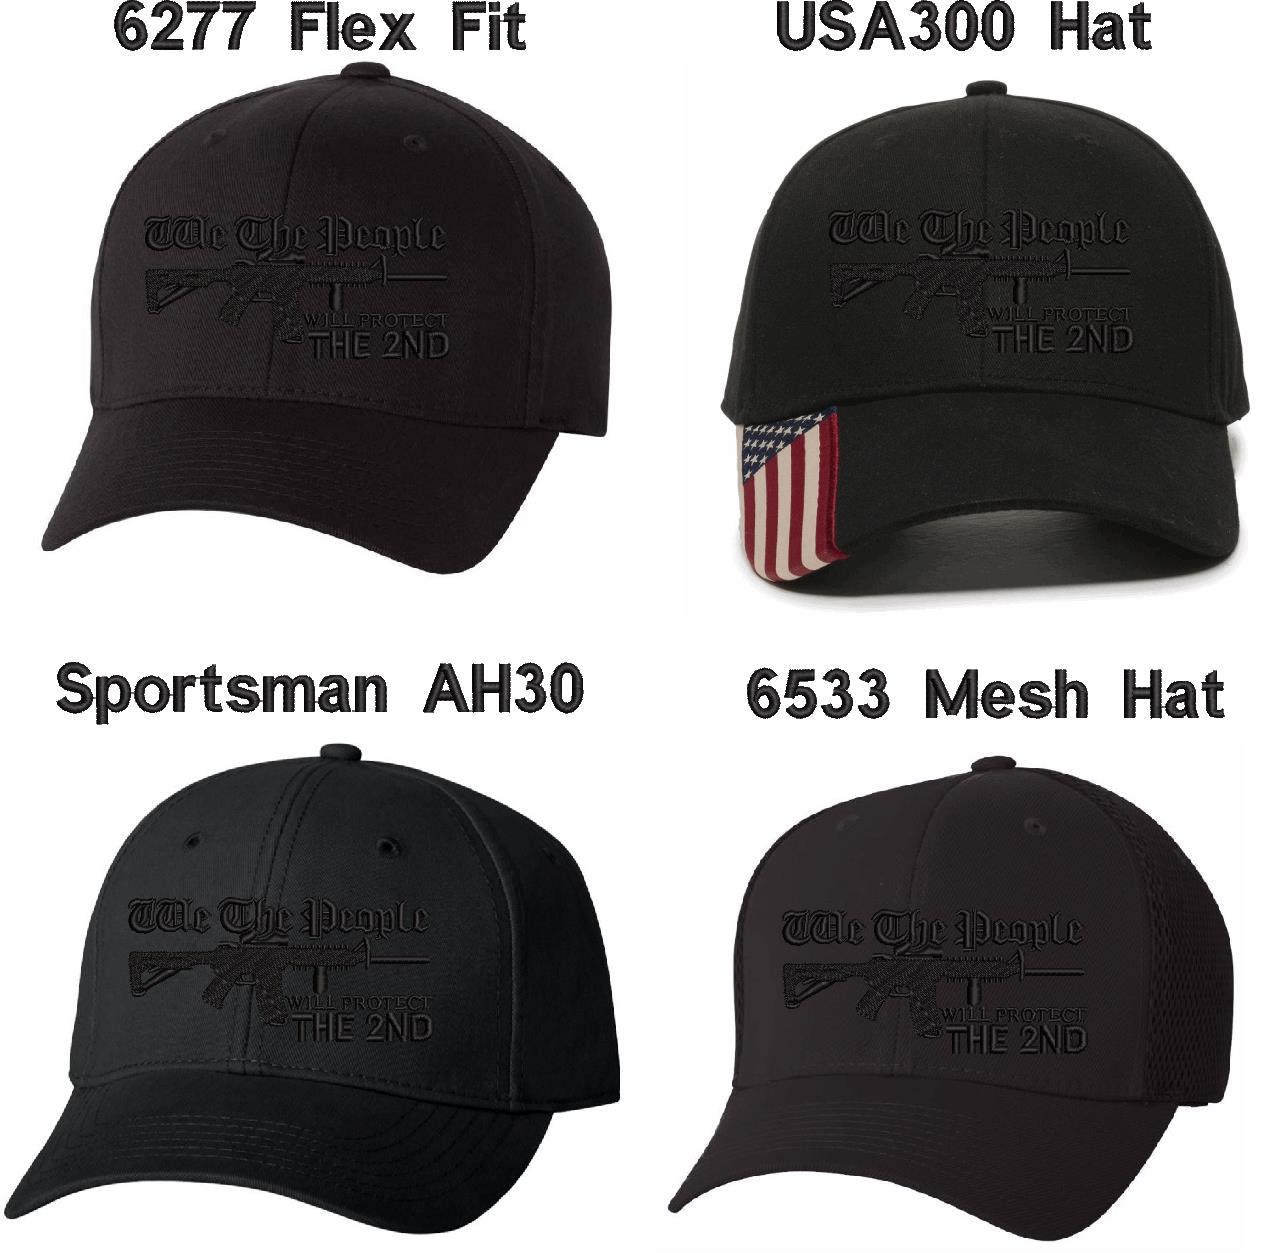 Support the 2nd AR15 Blackout Embroidered Hat - Powercall Sirens LLC